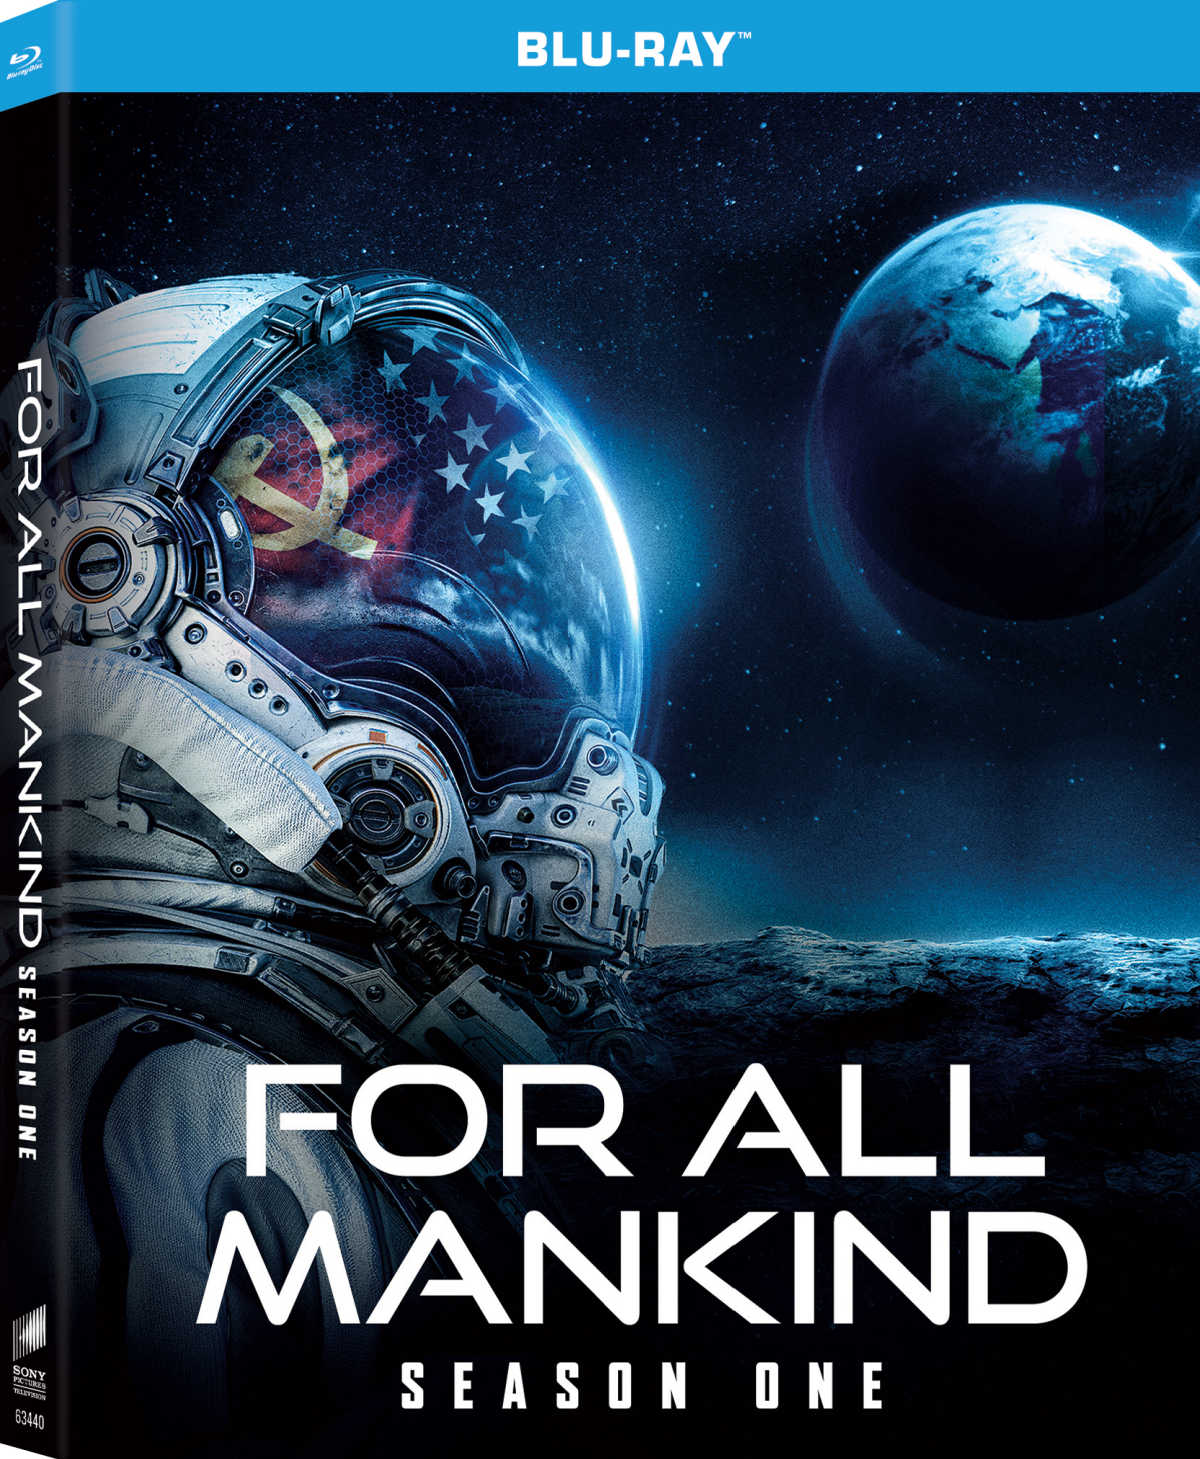 For All Mankind Season 1 Blu-ray Set is now available to own! This exciting new set features all 10 episodes of the hit Apple TV+ series in stunning high definition.